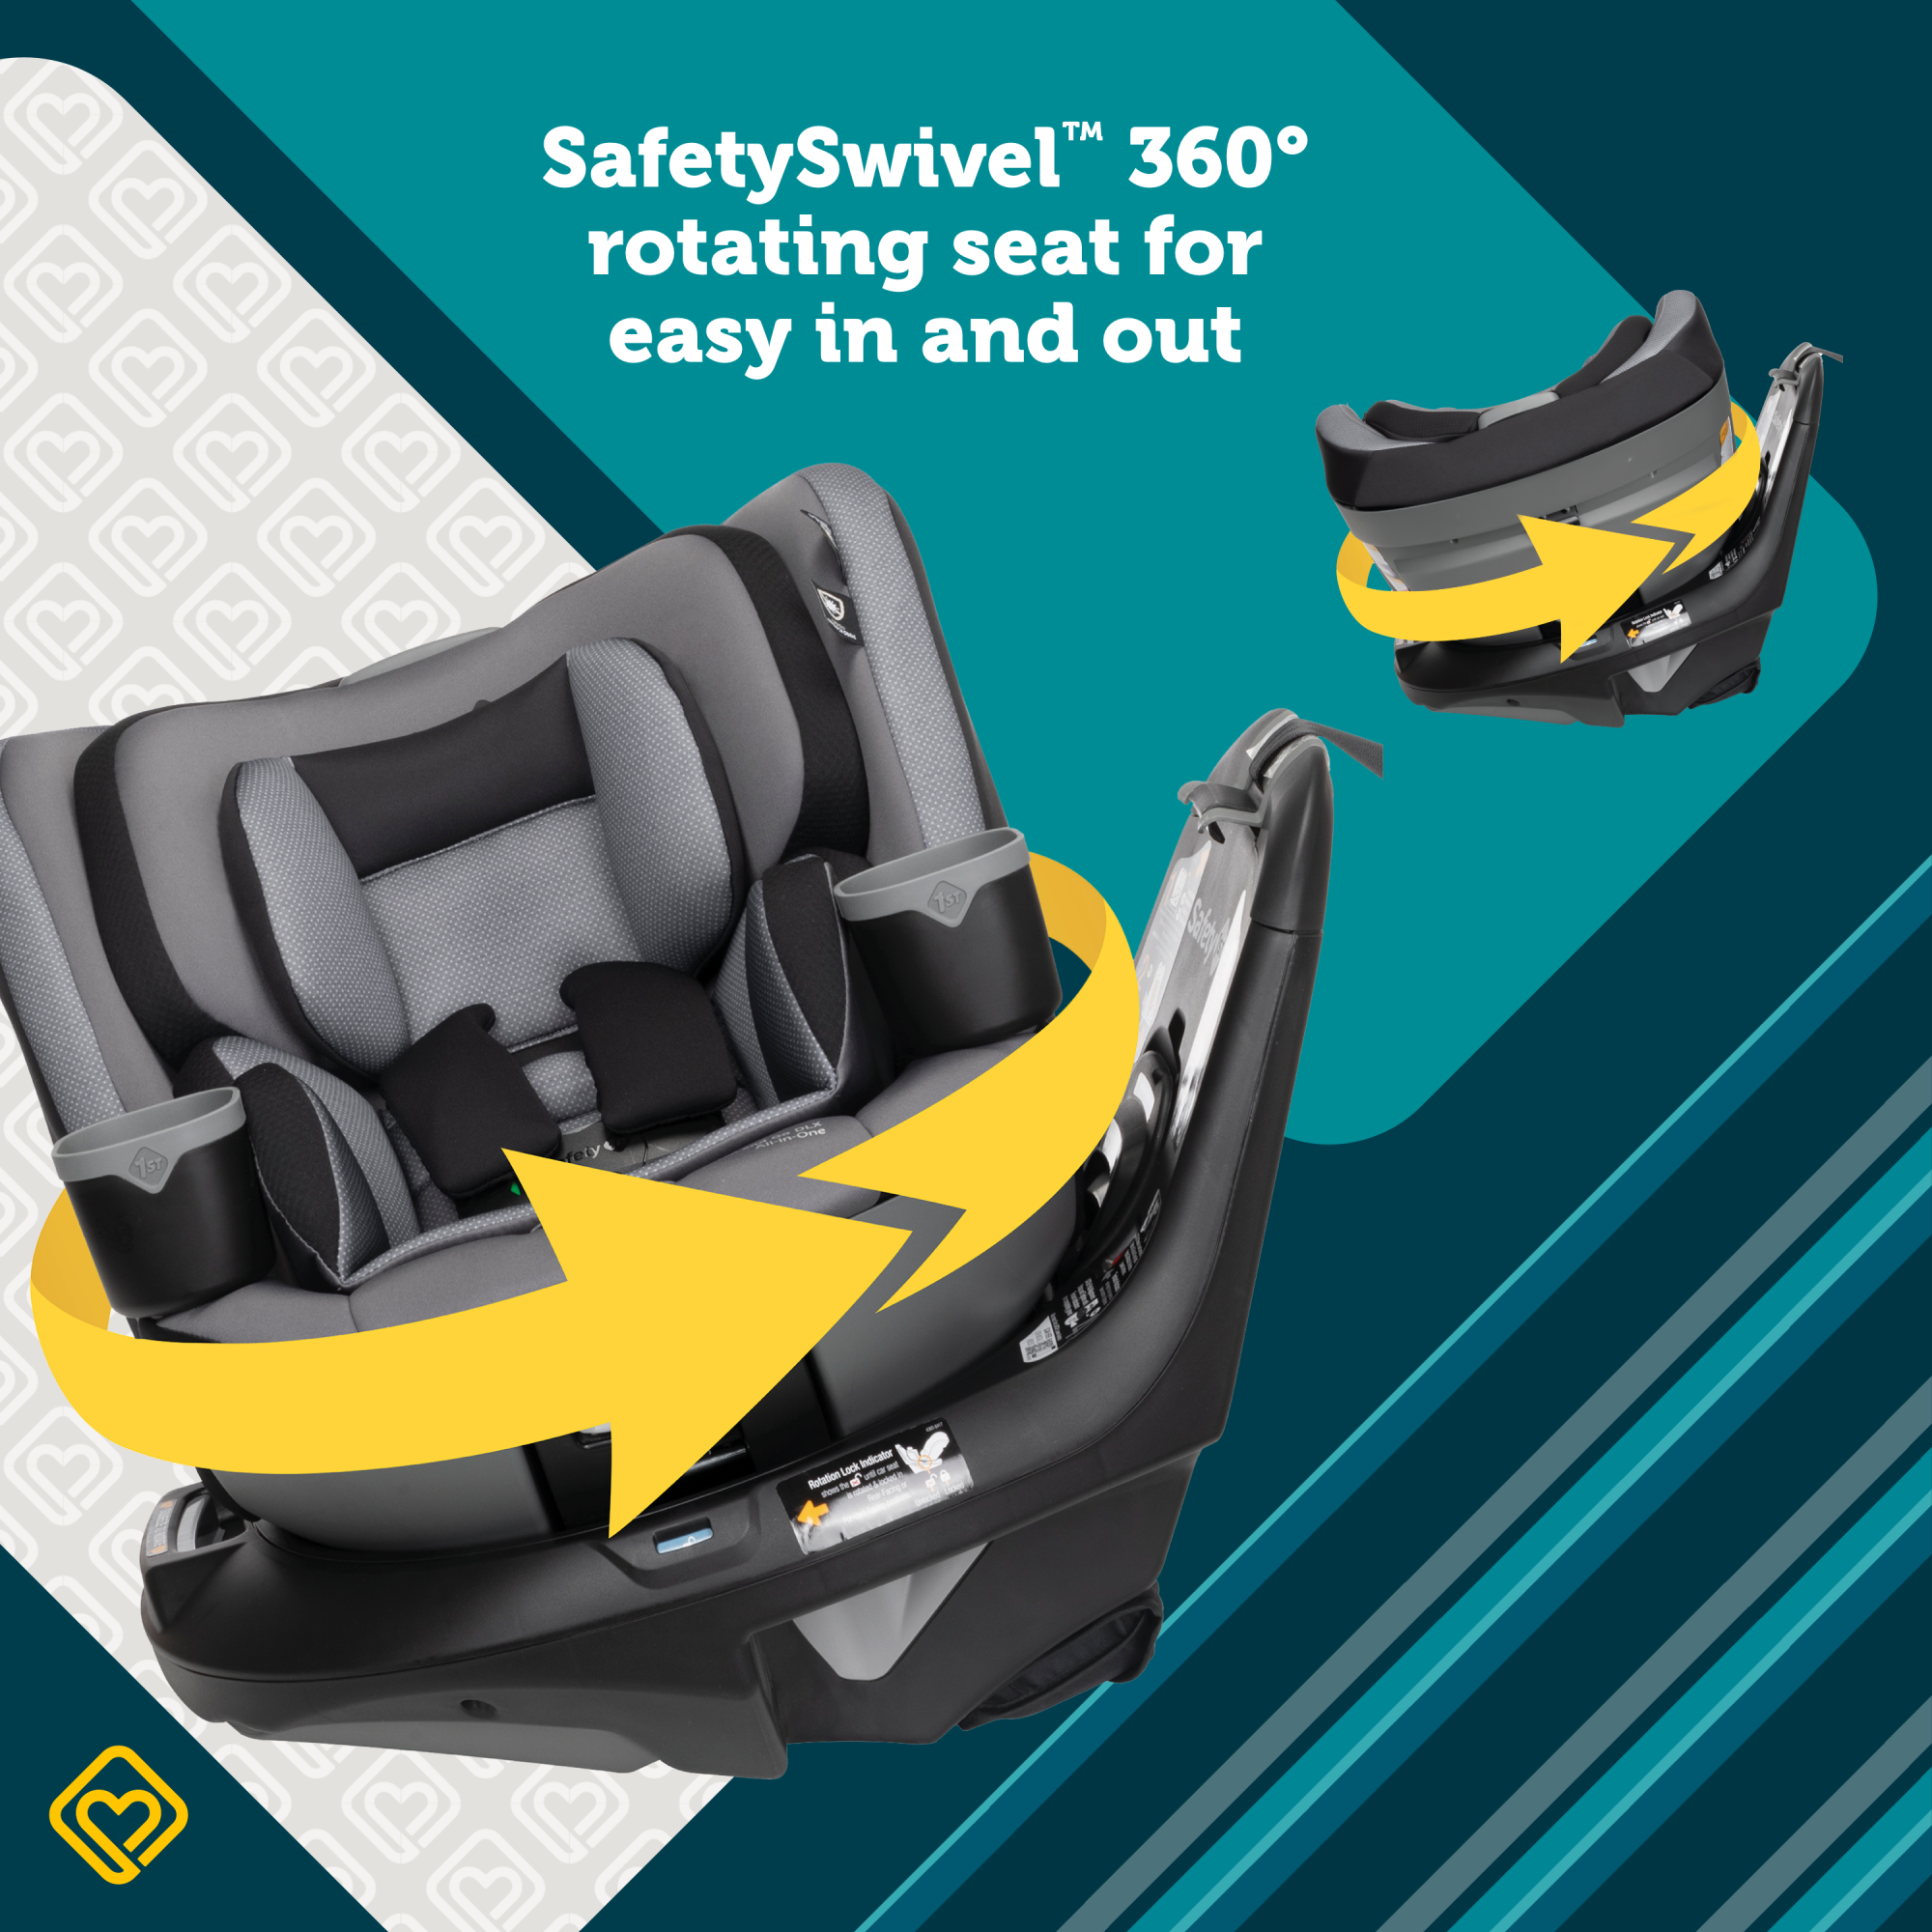 Turn and Go 360 DLX Rotating All-in-One Convertible Car Seat - SafetySwivel 360 degree rotating seat for easy in and out